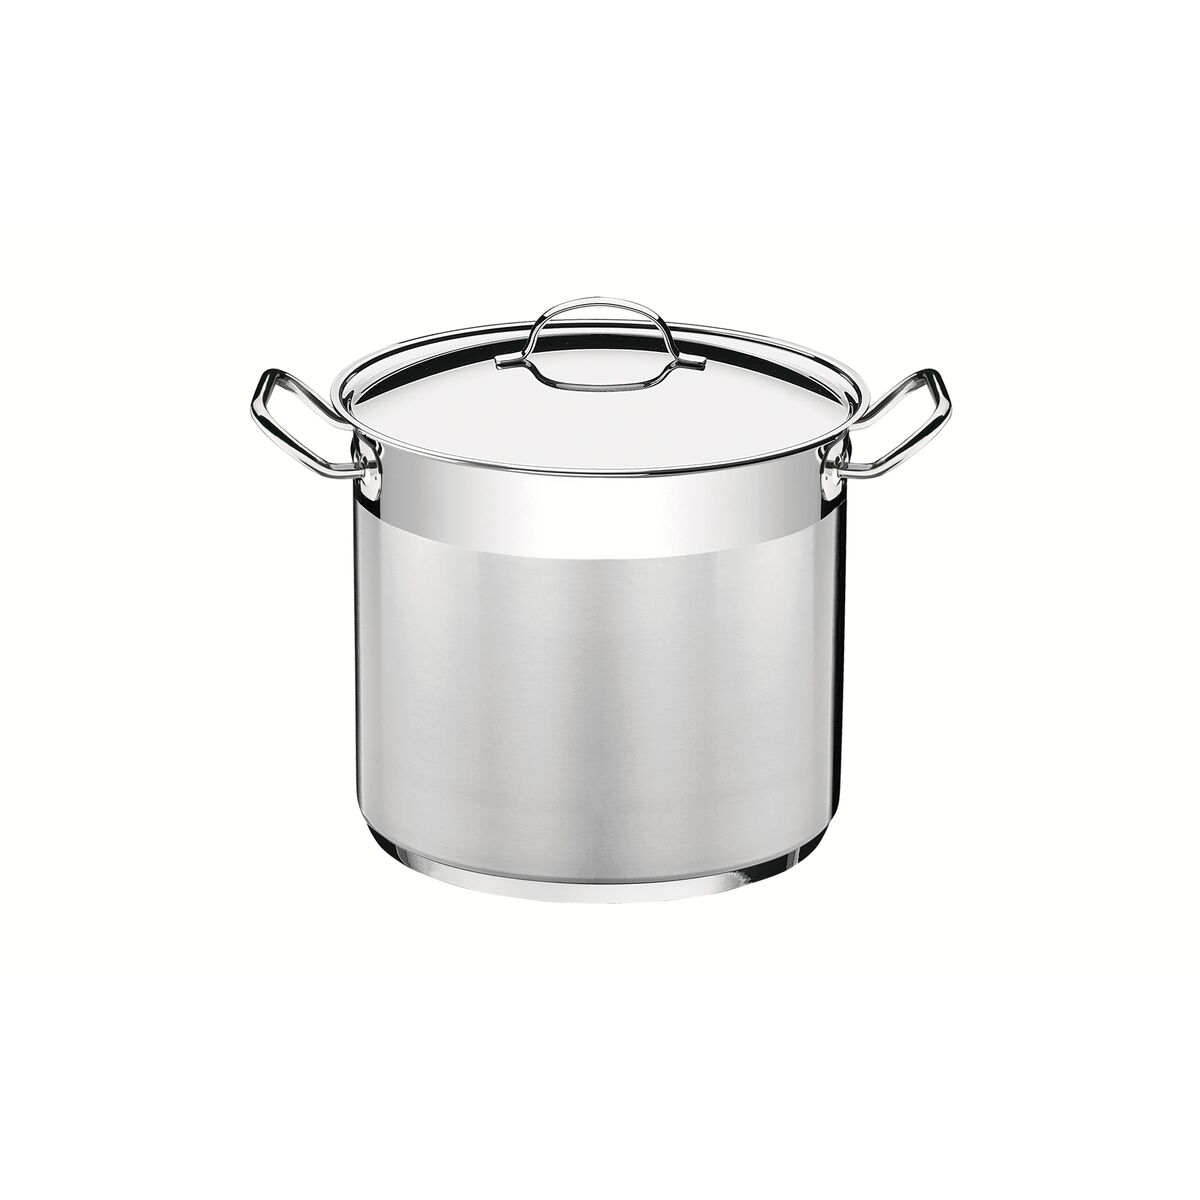 Tramontina Professional 20 cm 5.7 L stainless steel stock pot with lid, tri-ply base and handles